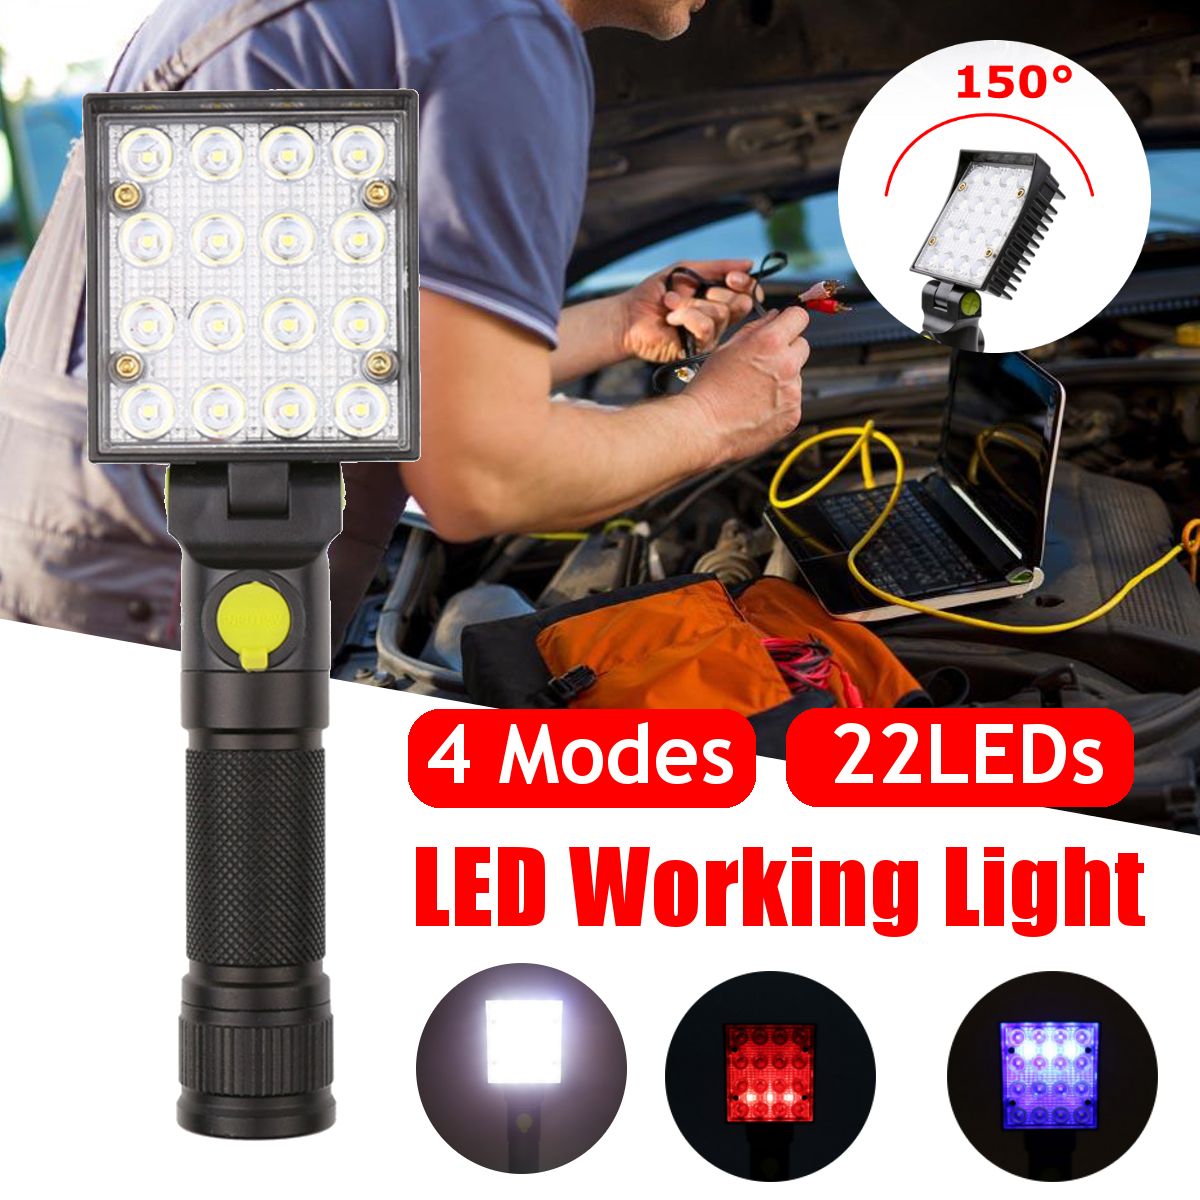 15W-LED-Magnetic-Work-Light-4-mode-Foldable-Rechargeable-Car-Garage-Mechanic-Flashlight-Torch-Lamp-1725627